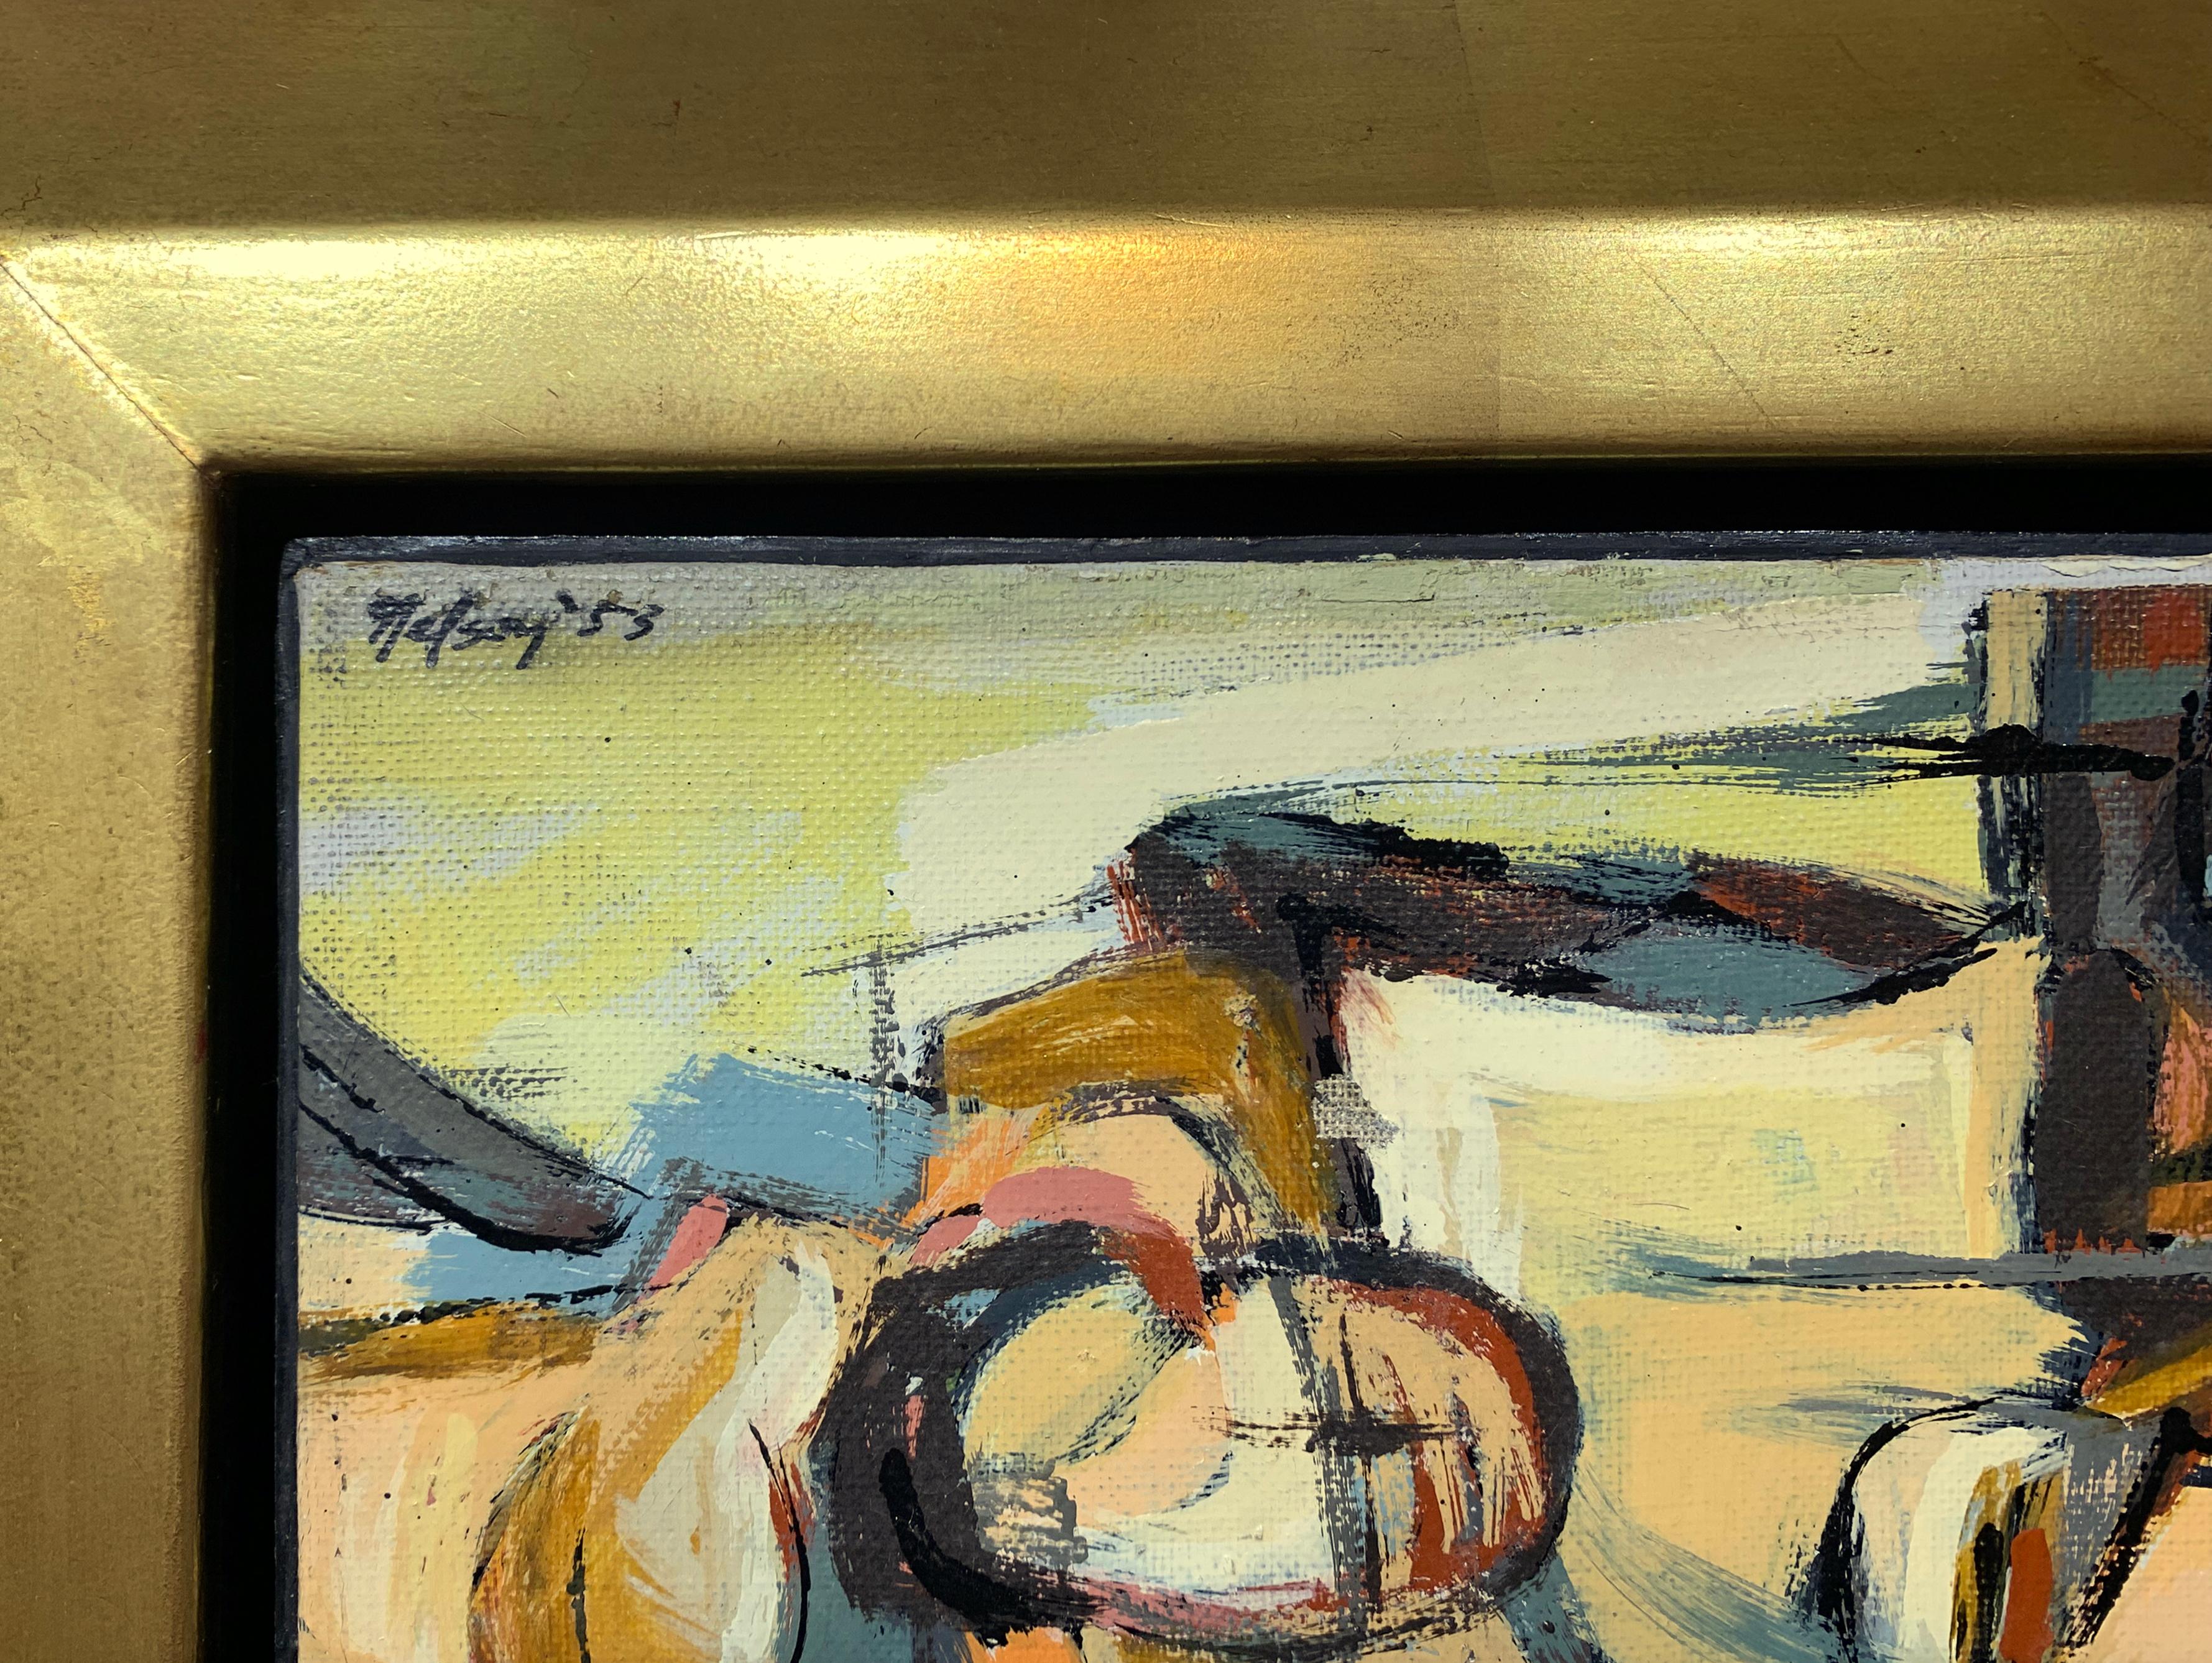 Figurative Abstraction #2, American Modernist, Oil on Canvas, 1953 - Painting by Leonard Nelson